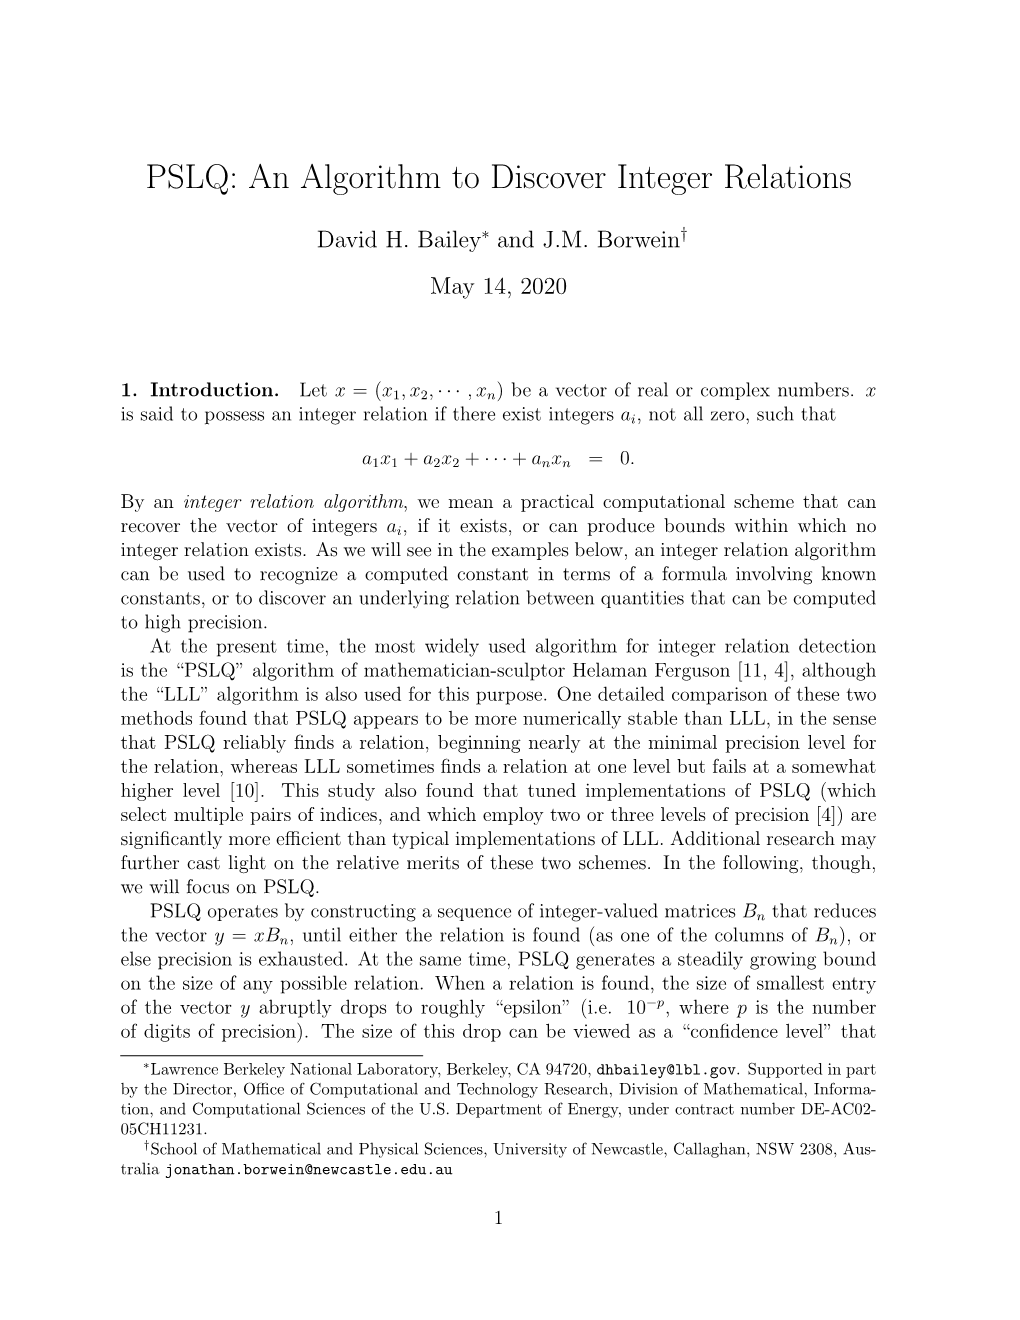 PSLQ: an Algorithm to Discover Integer Relations